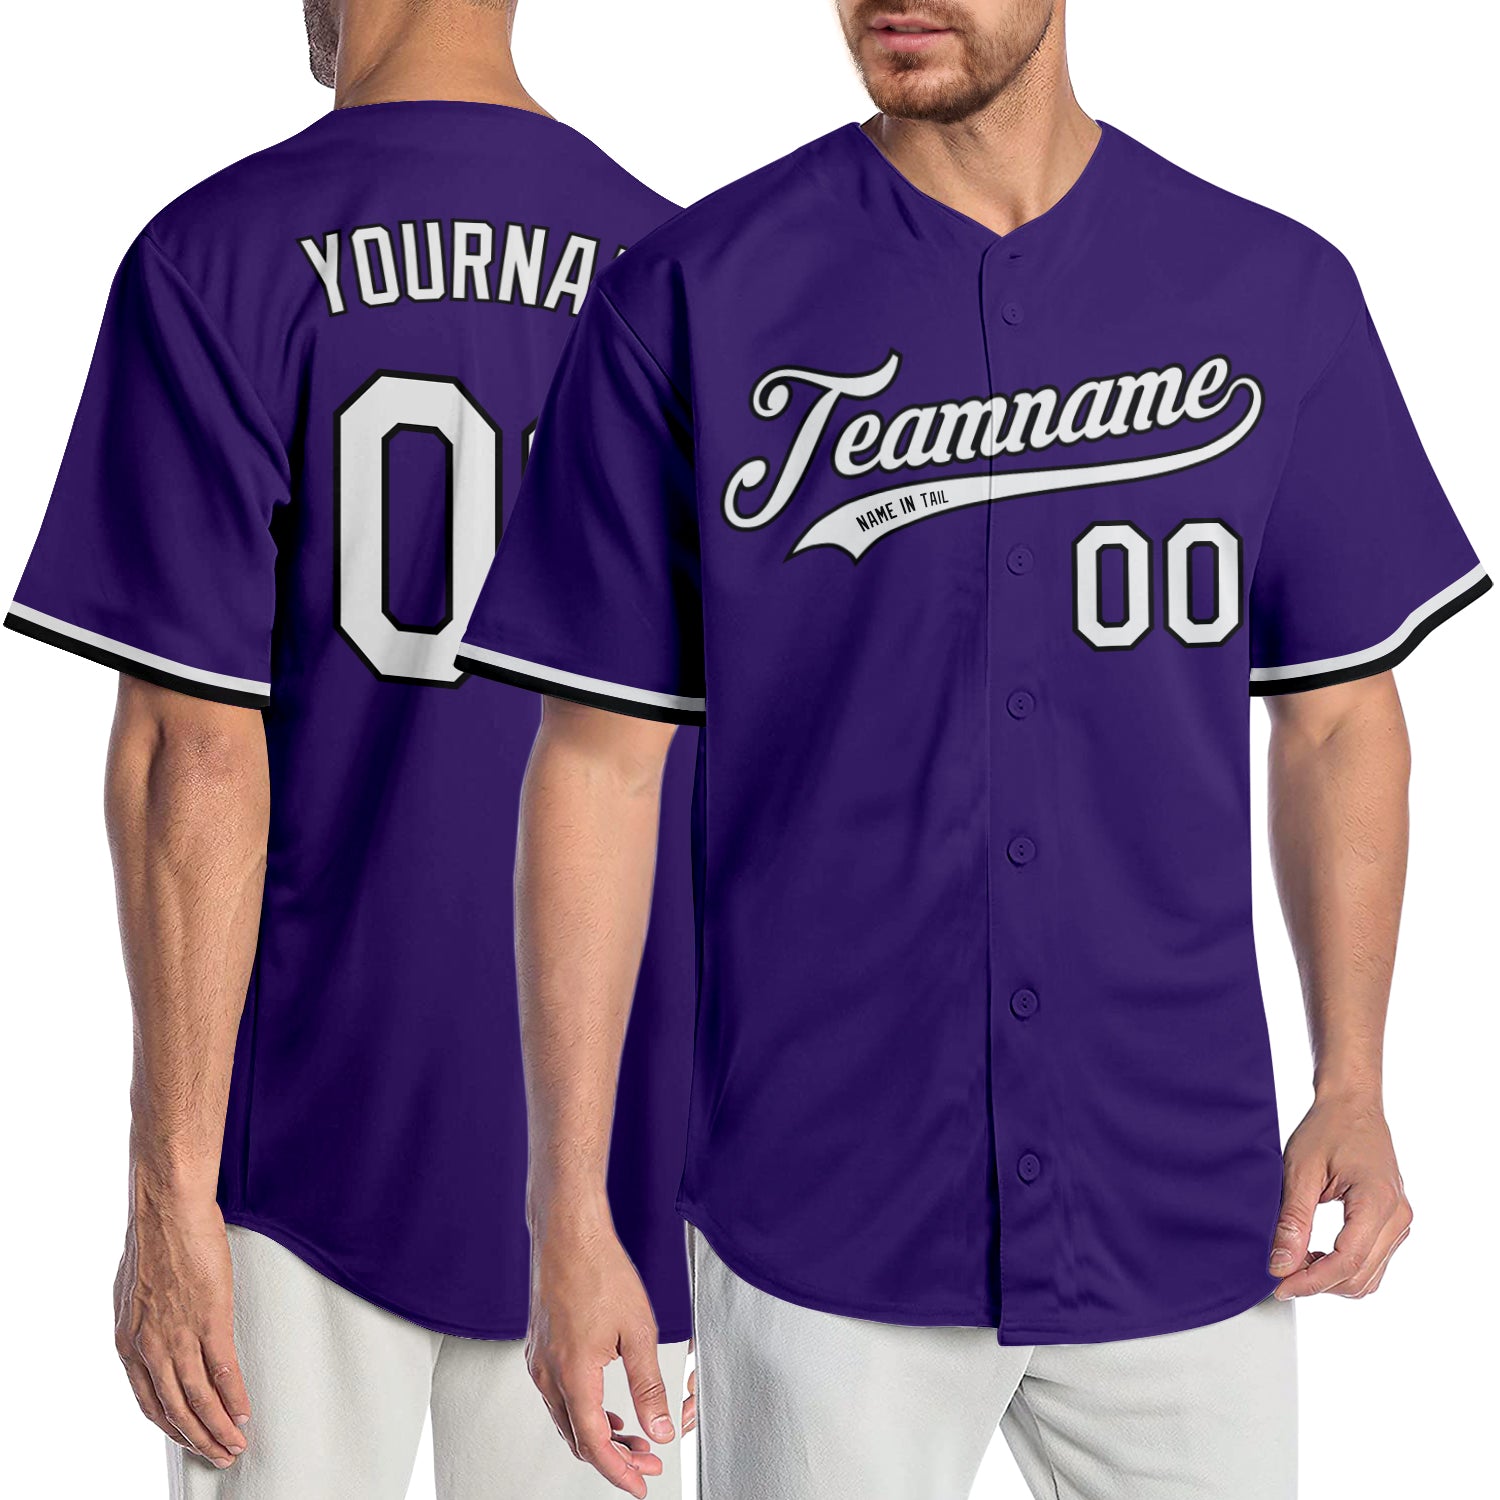 Black and Purple Baseball Jersey Dress with White Contrasting Taping on  Neck, Sleeves and Button Hem / Black Button Front